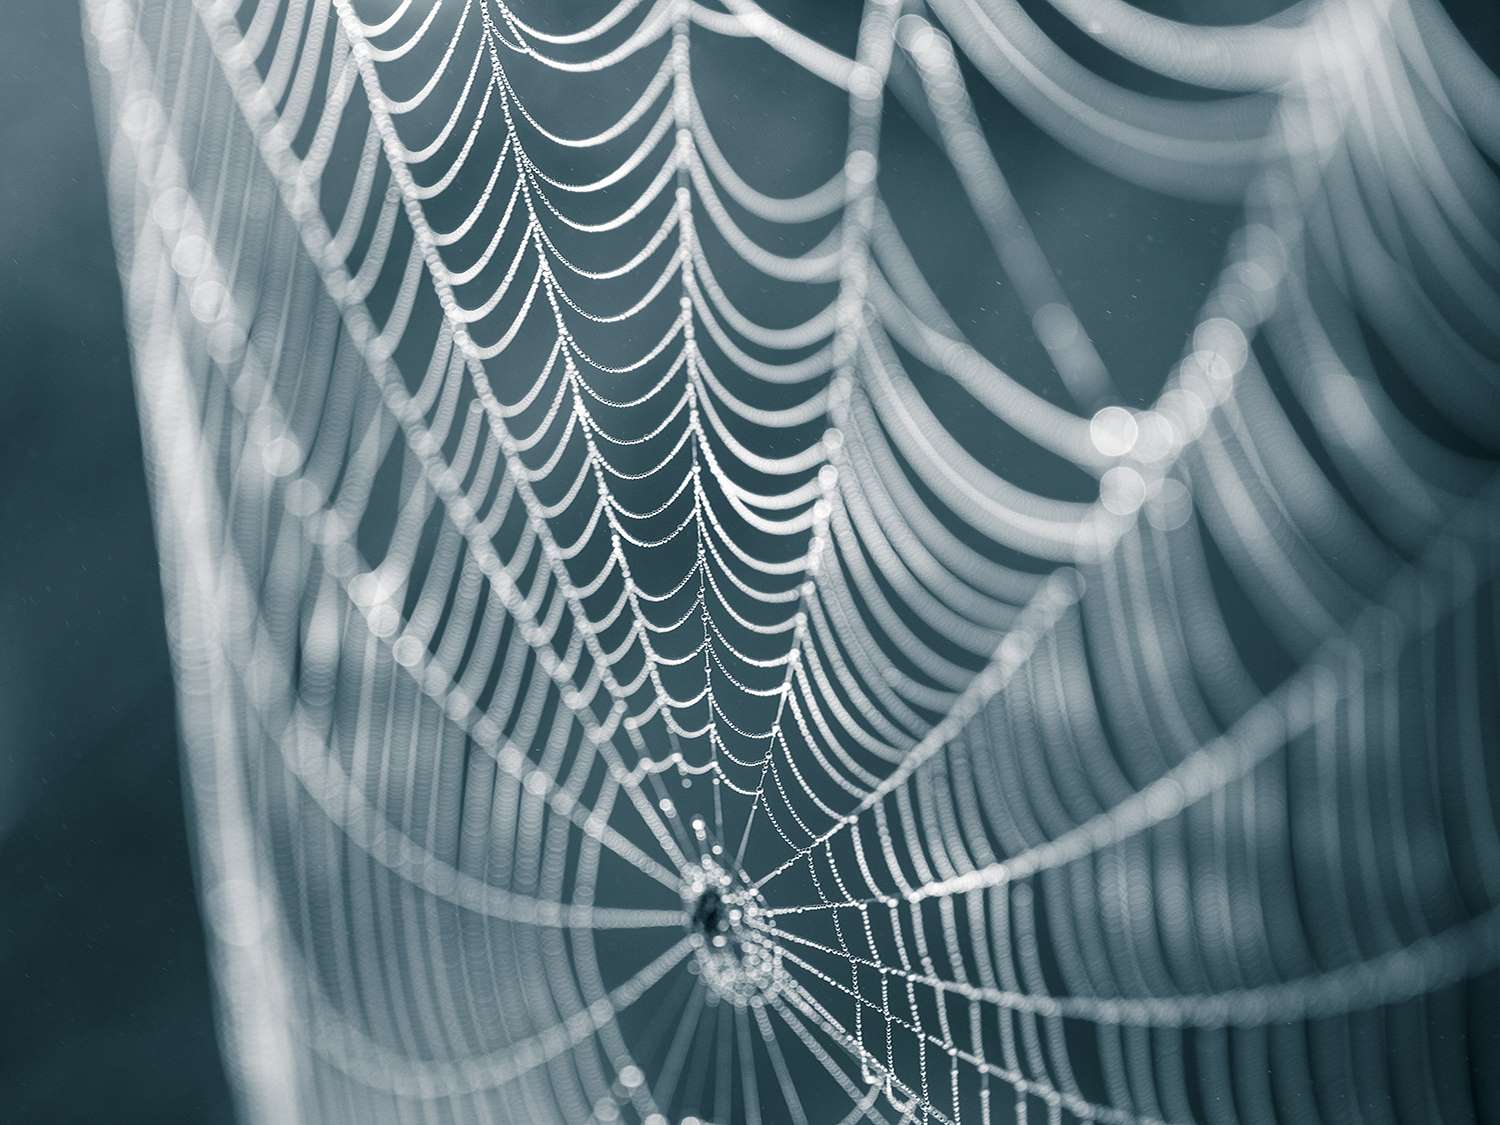 Mimicking spider silk production and fibres